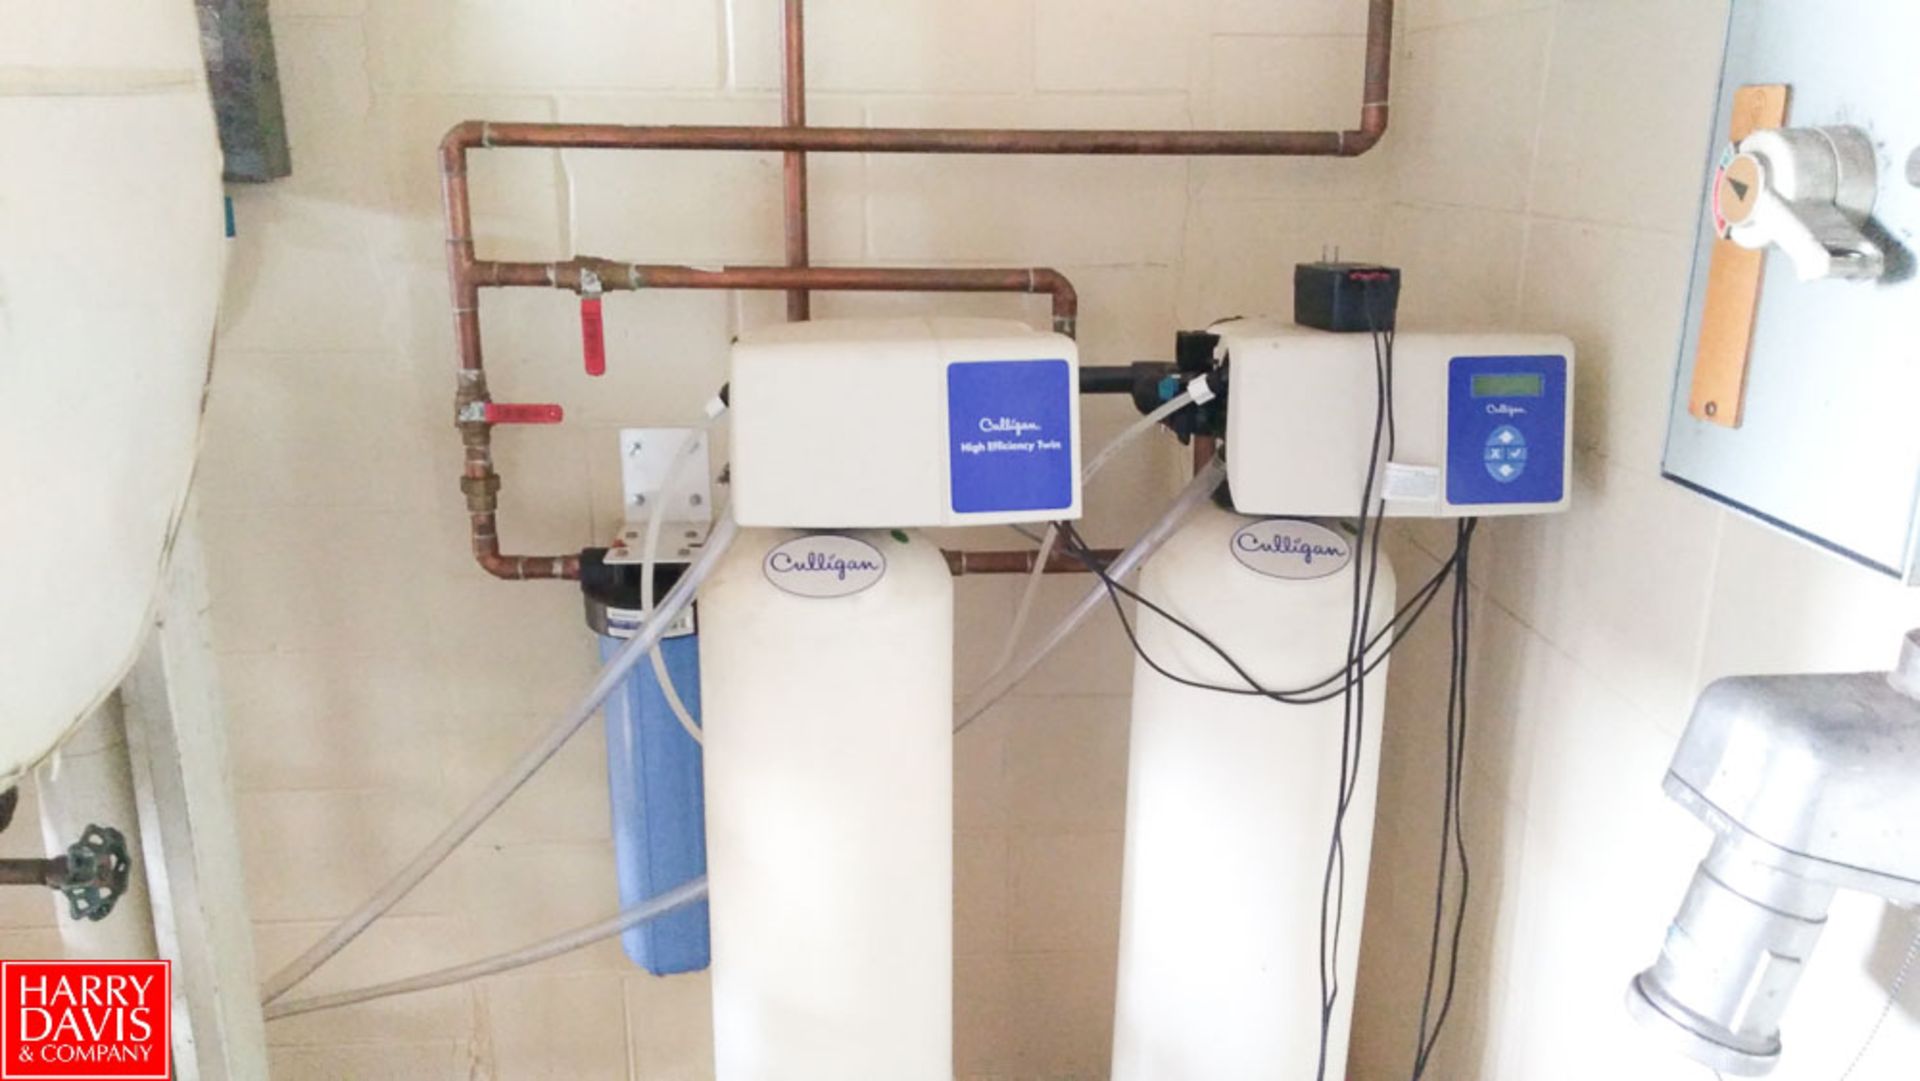 Cleaver Brooks 100 HP Natural Gas Boiler with Boiler Feed System and Culligan Water Softener - Image 4 of 5